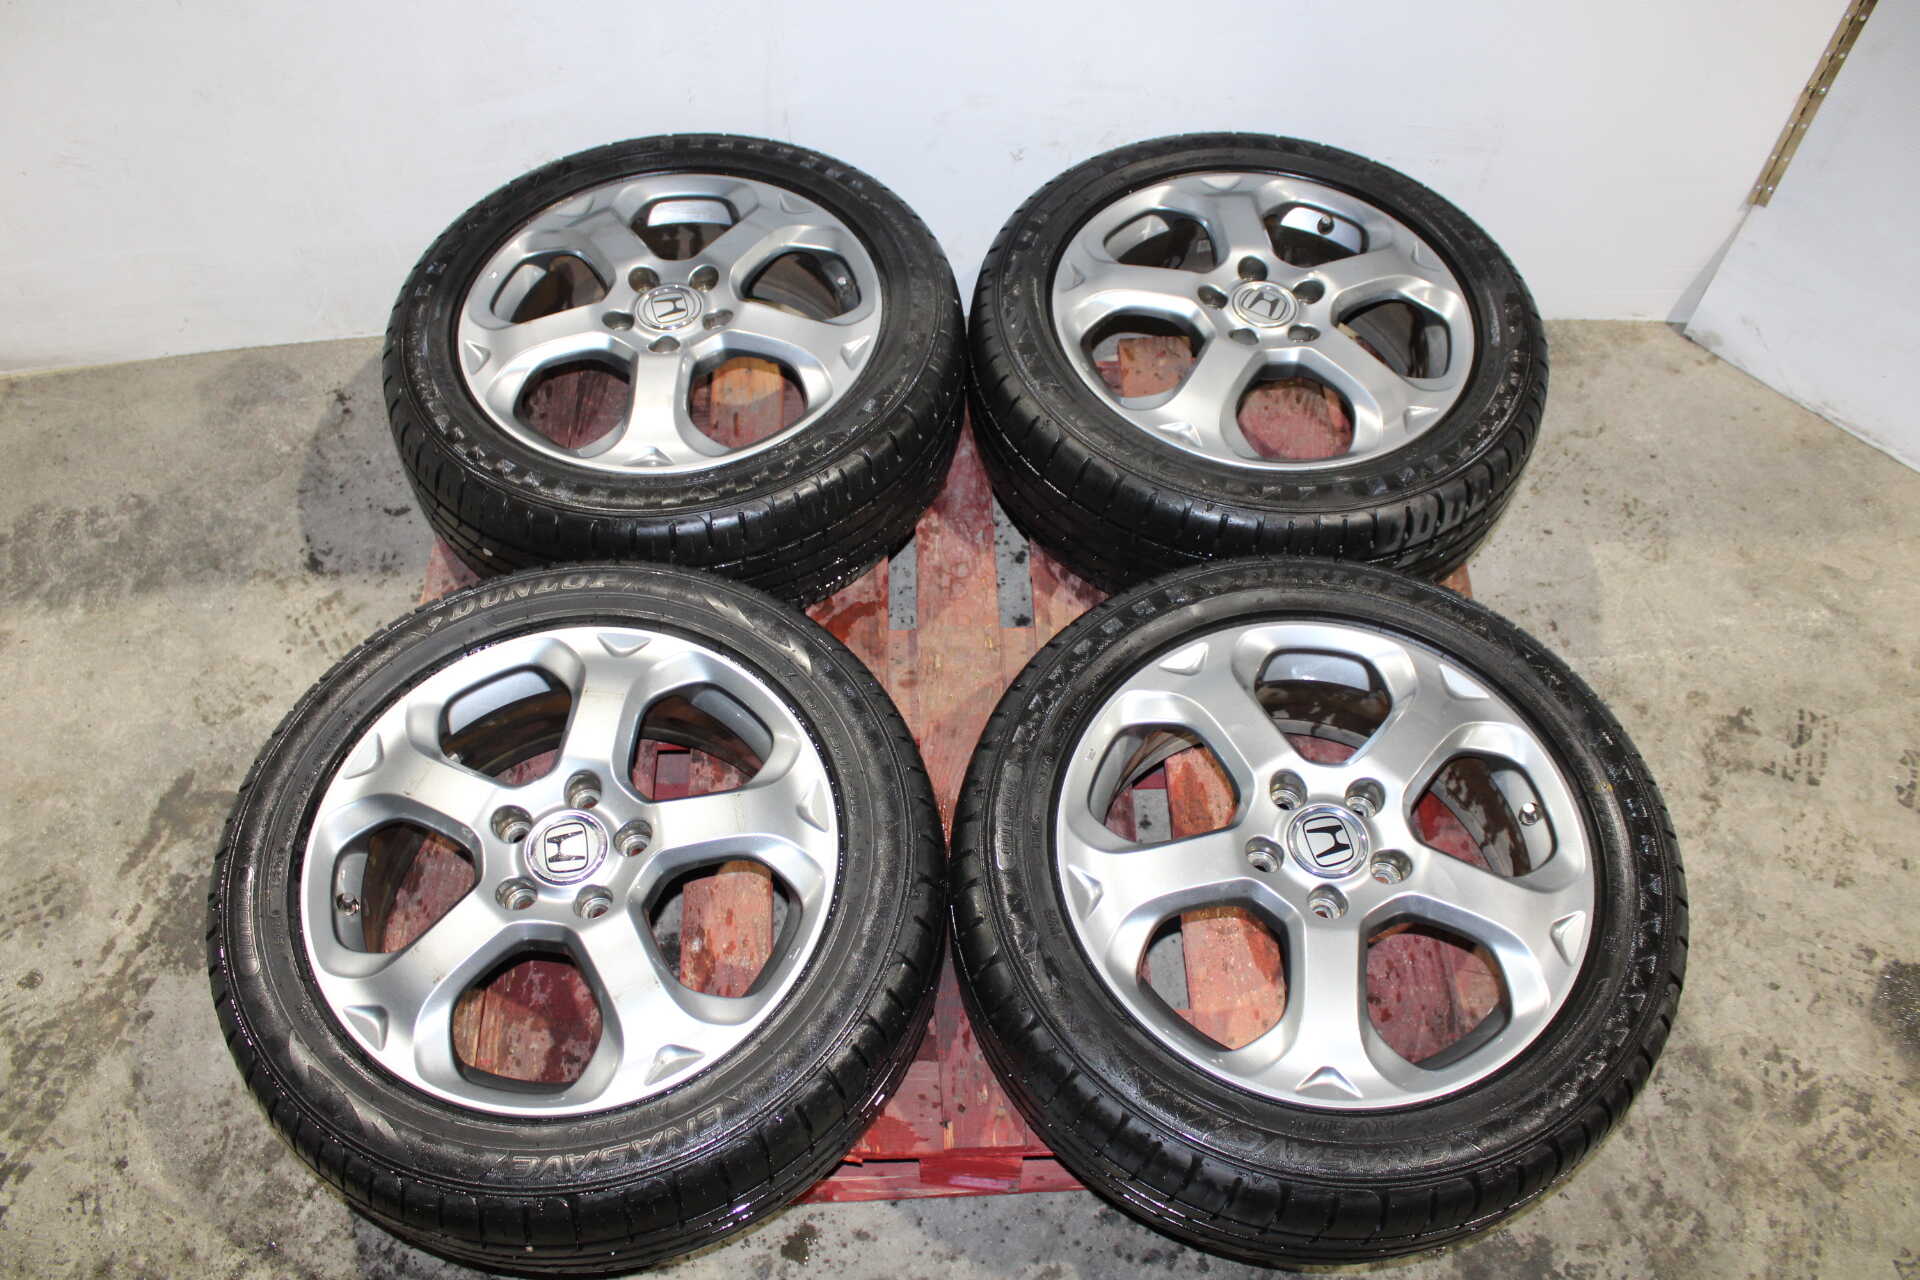 JDM HONDA WHEELS Imported from Japan 5X114.3 205 / 55 R17 17X6J OFFSET +55 Dunlop tires